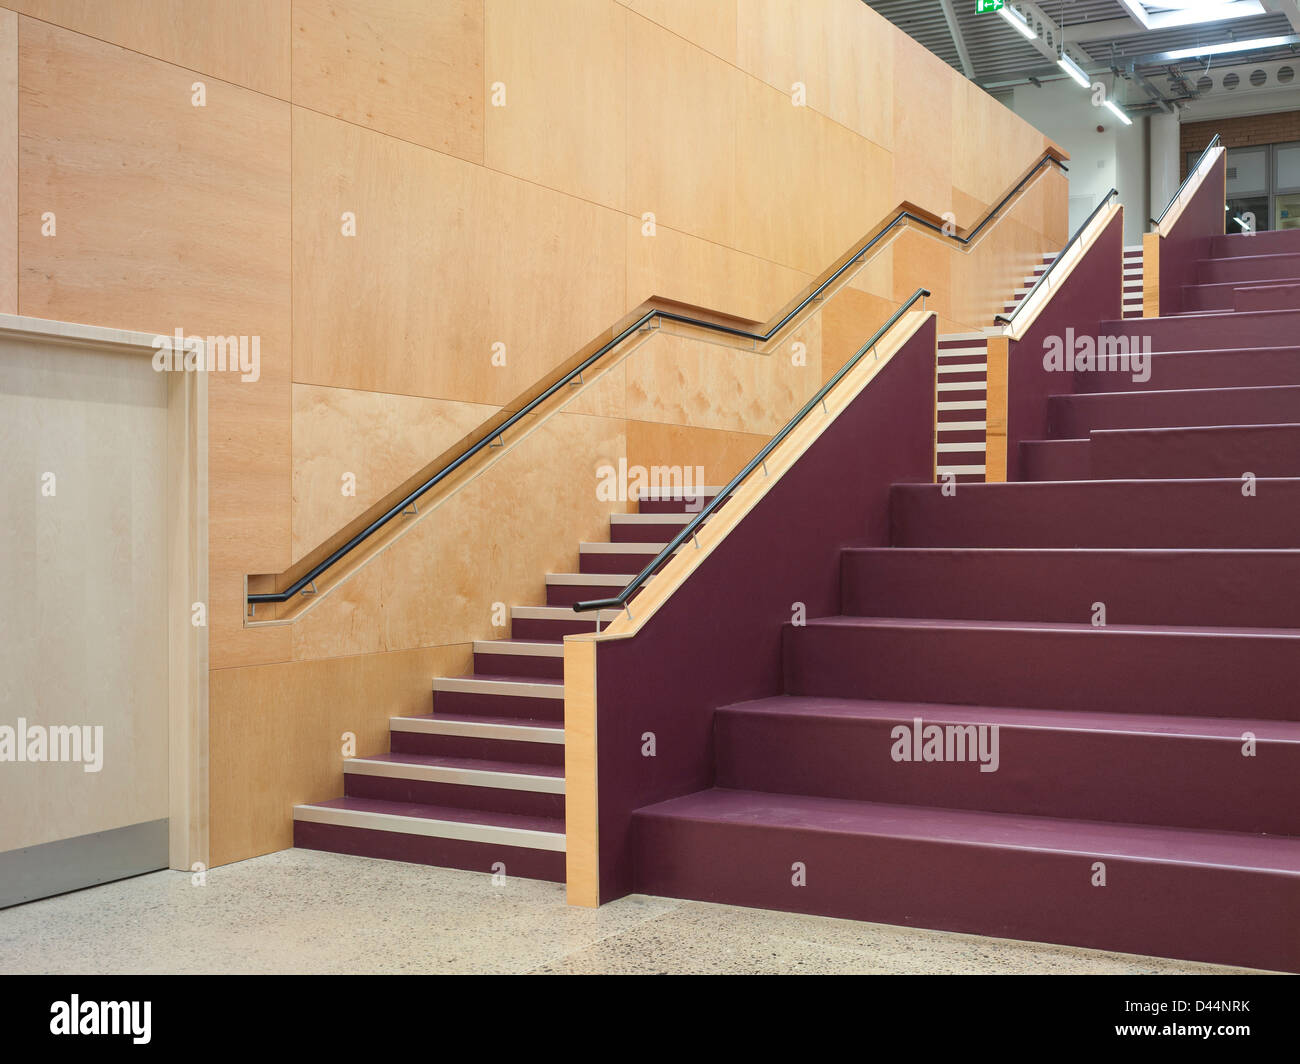 University of Westminister - Harrow Campus, Harrow, Regno Unito. Architetto: Hawkins Brown Architects LLP, 2013. Staircas rosa Foto Stock